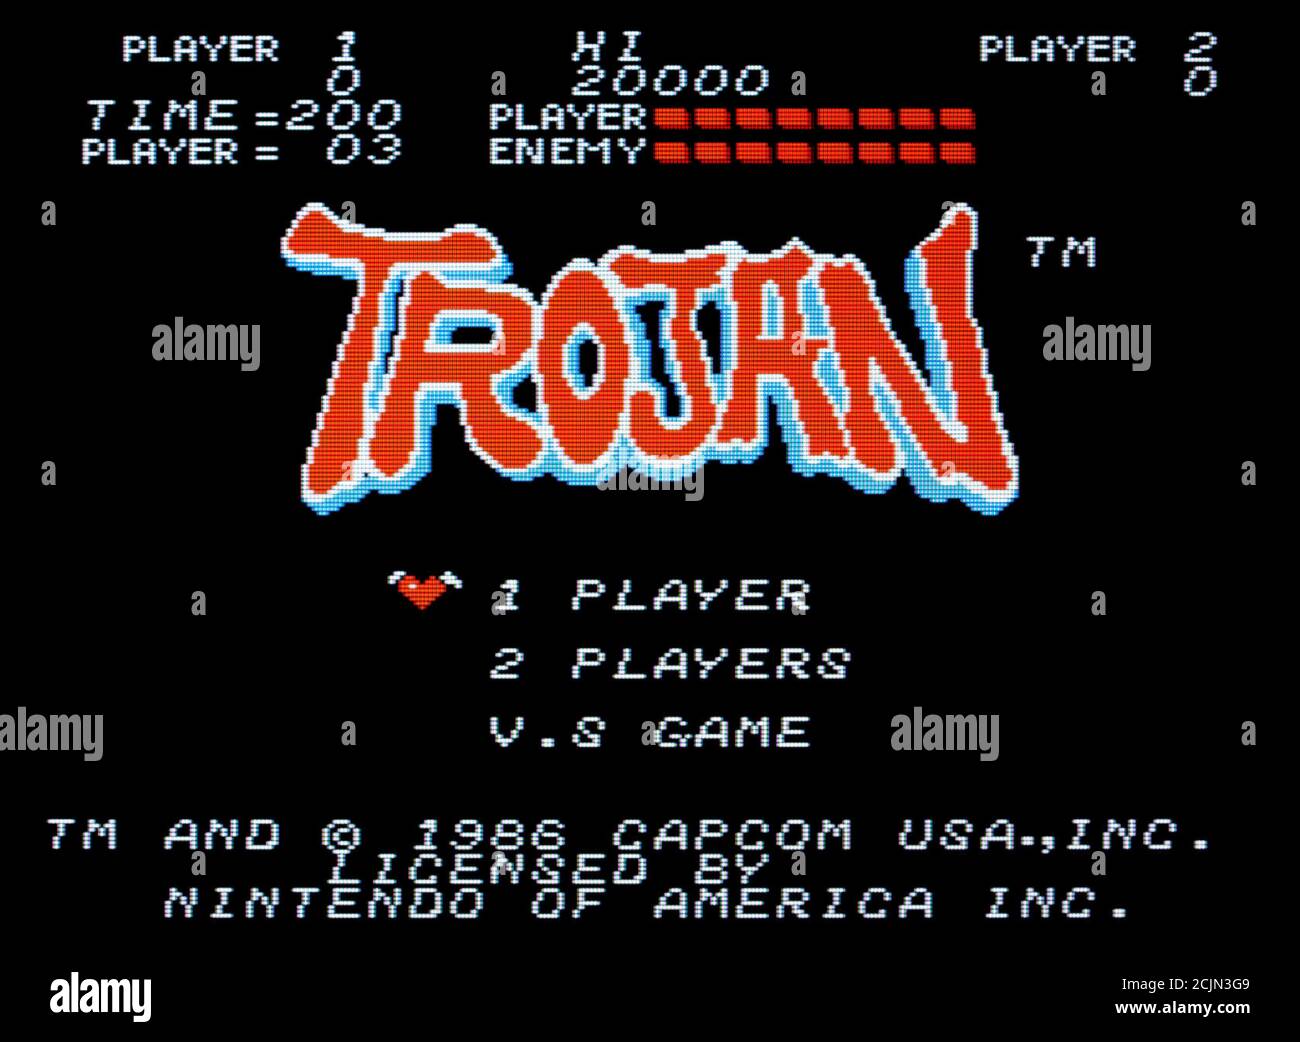 Trojan - Nintendo Entertainment System - NES Videogame - Editorial use only Stock Photo